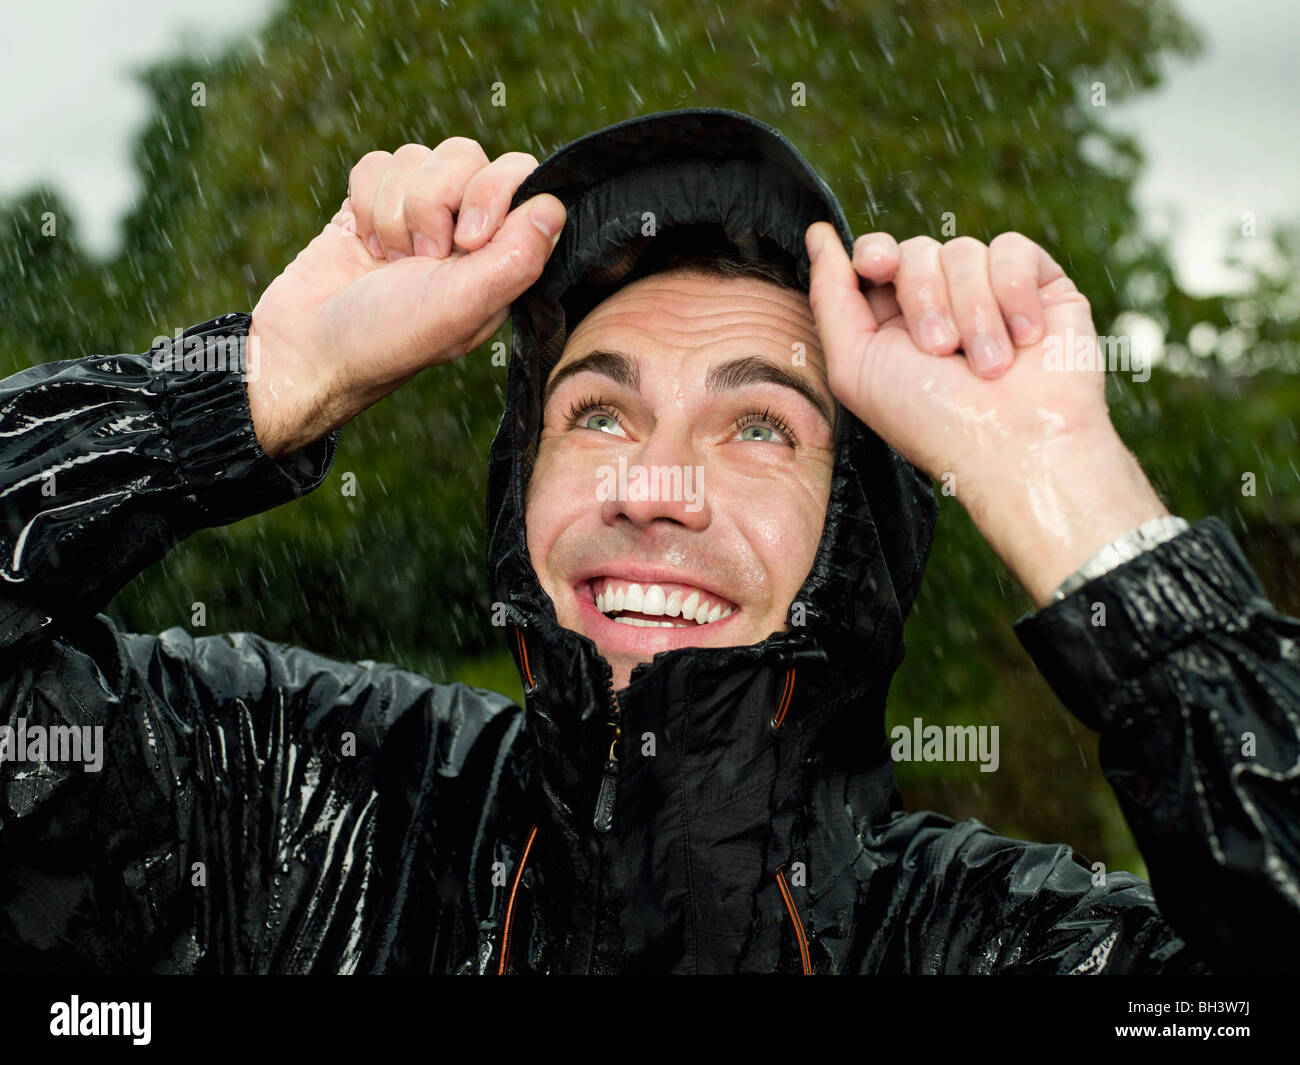 A man getting soaked in the rain Stock Photo